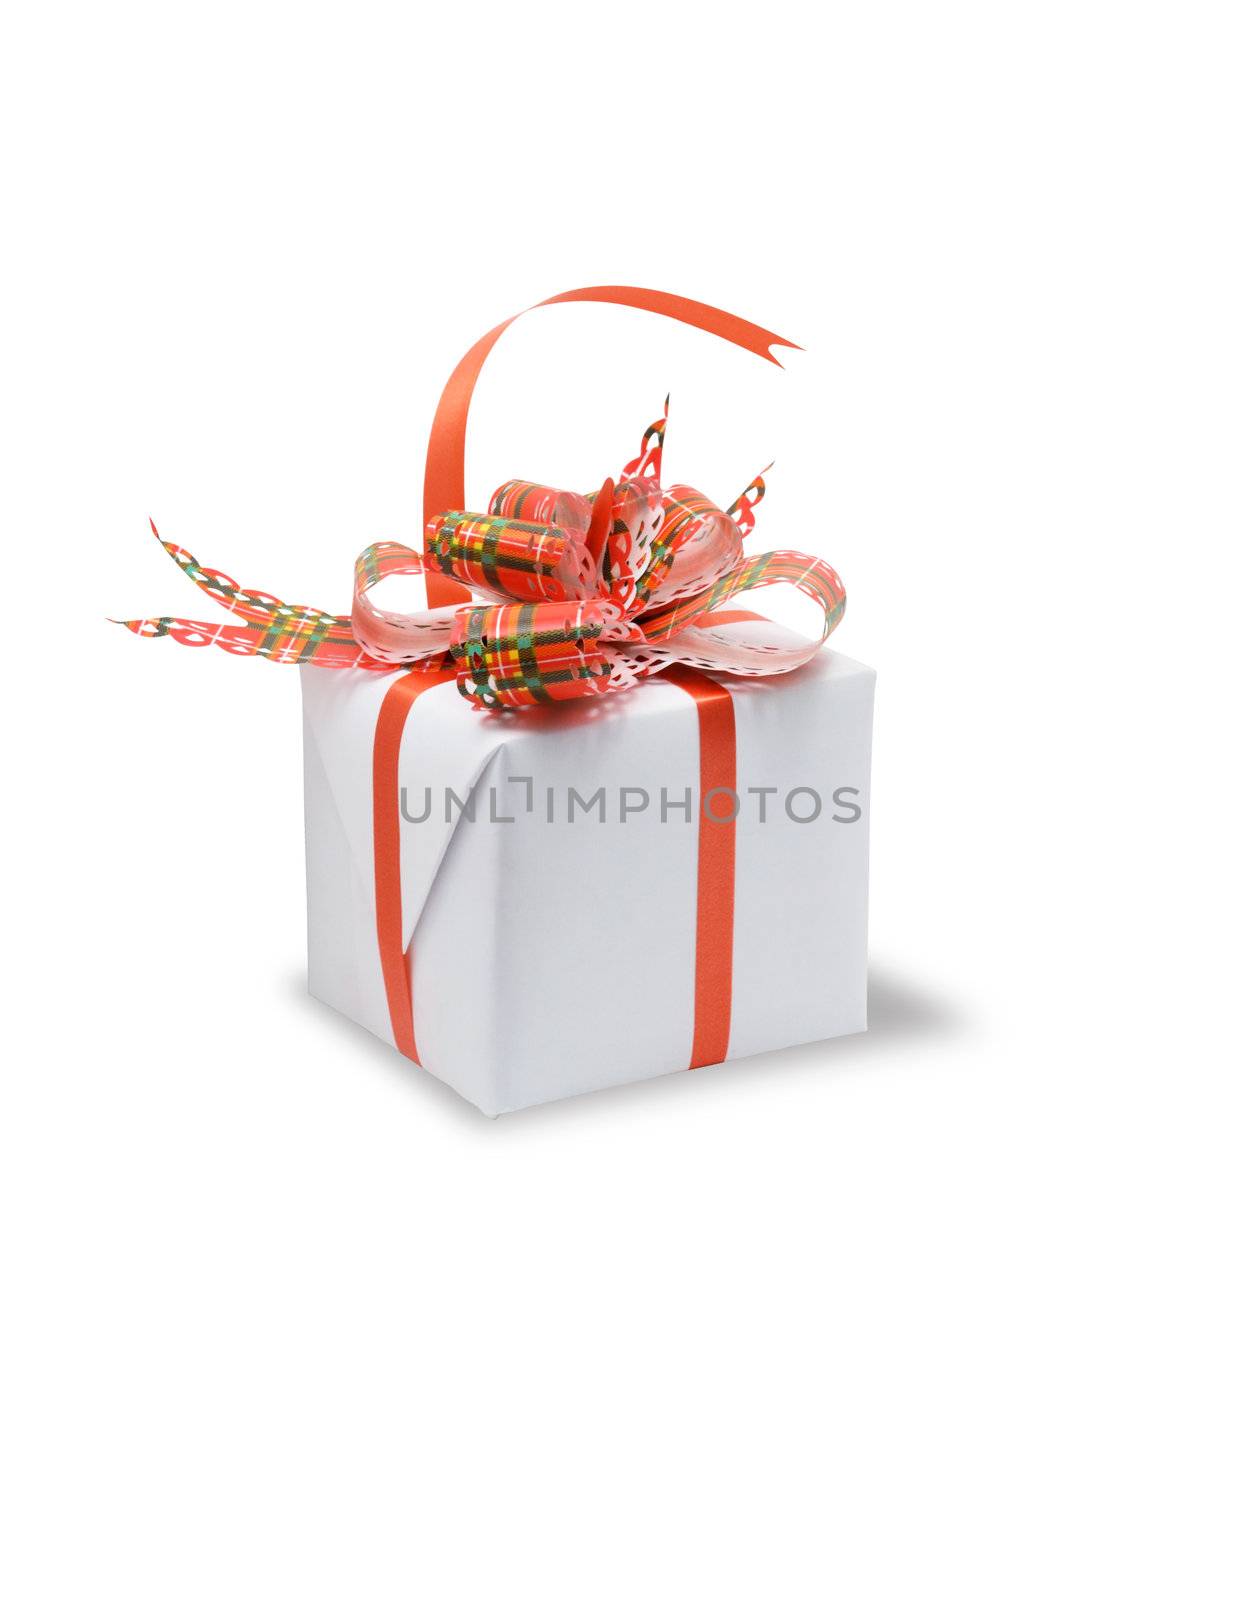 A white box tied with a colored ribbon bow. Isolated on white with clipping path